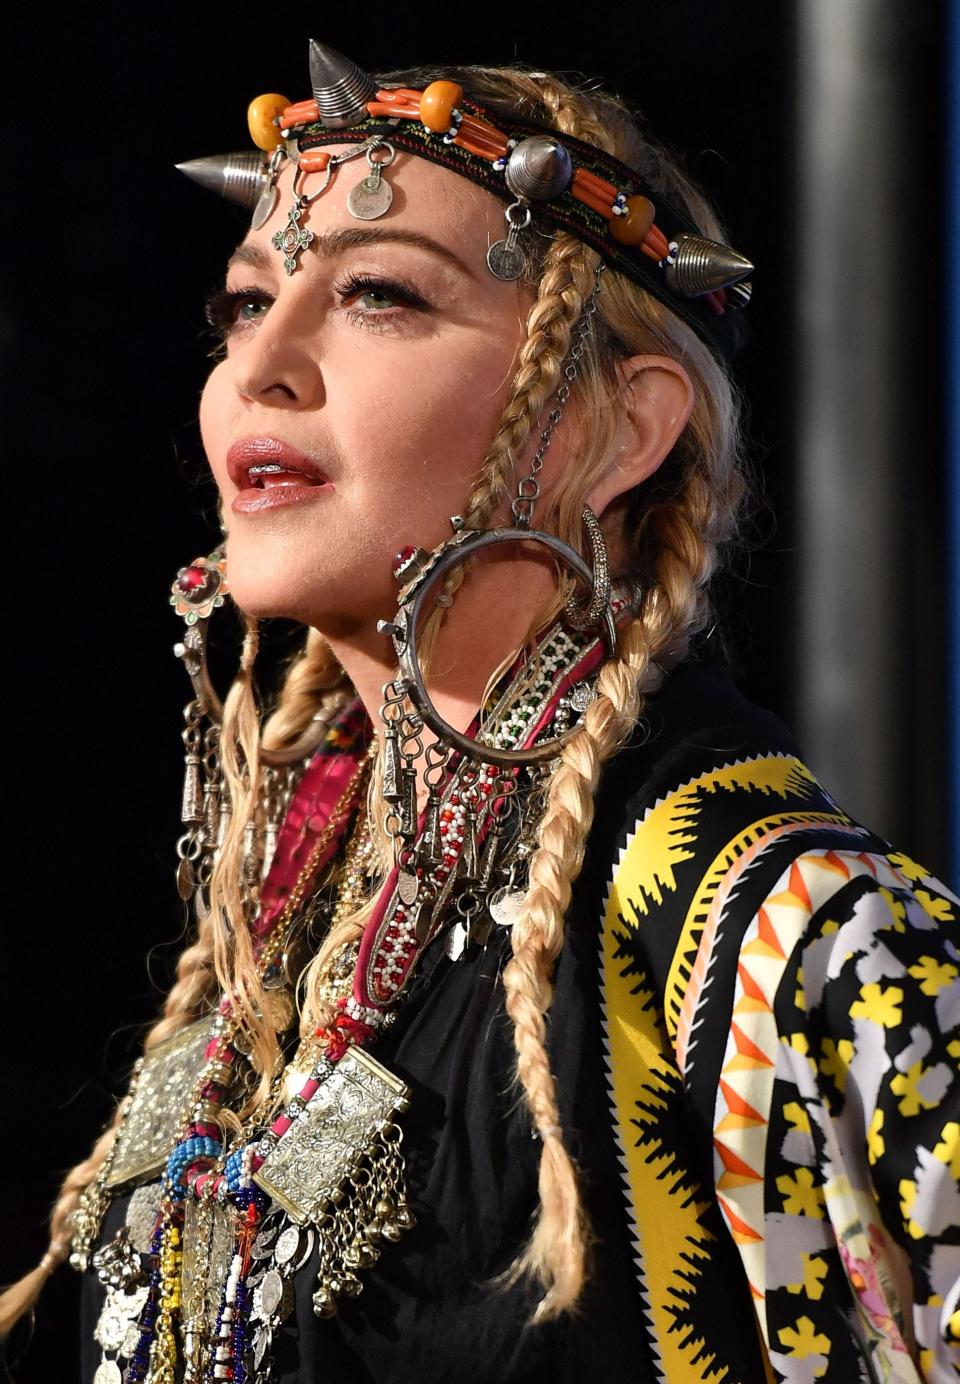 Madonna is recovering and has postponed the North American leg of her upcoming tour.